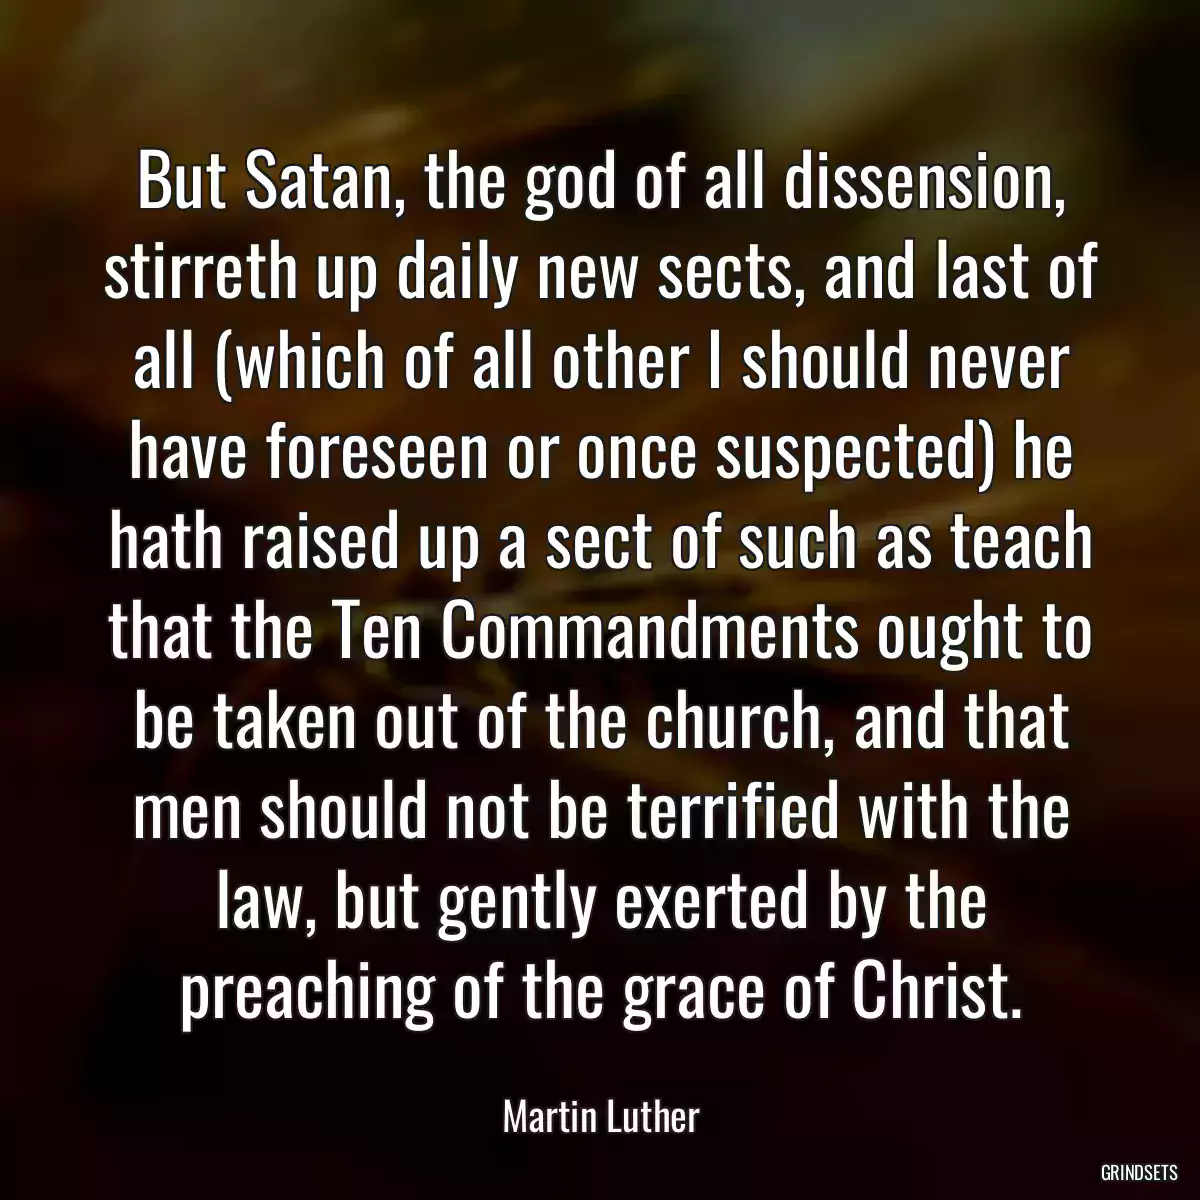 But Satan, the god of all dissension, stirreth up daily new sects, and last of all (which of all other I should never have foreseen or once suspected) he hath raised up a sect of such as teach that the Ten Commandments ought to be taken out of the church, and that men should not be terrified with the law, but gently exerted by the preaching of the grace of Christ.